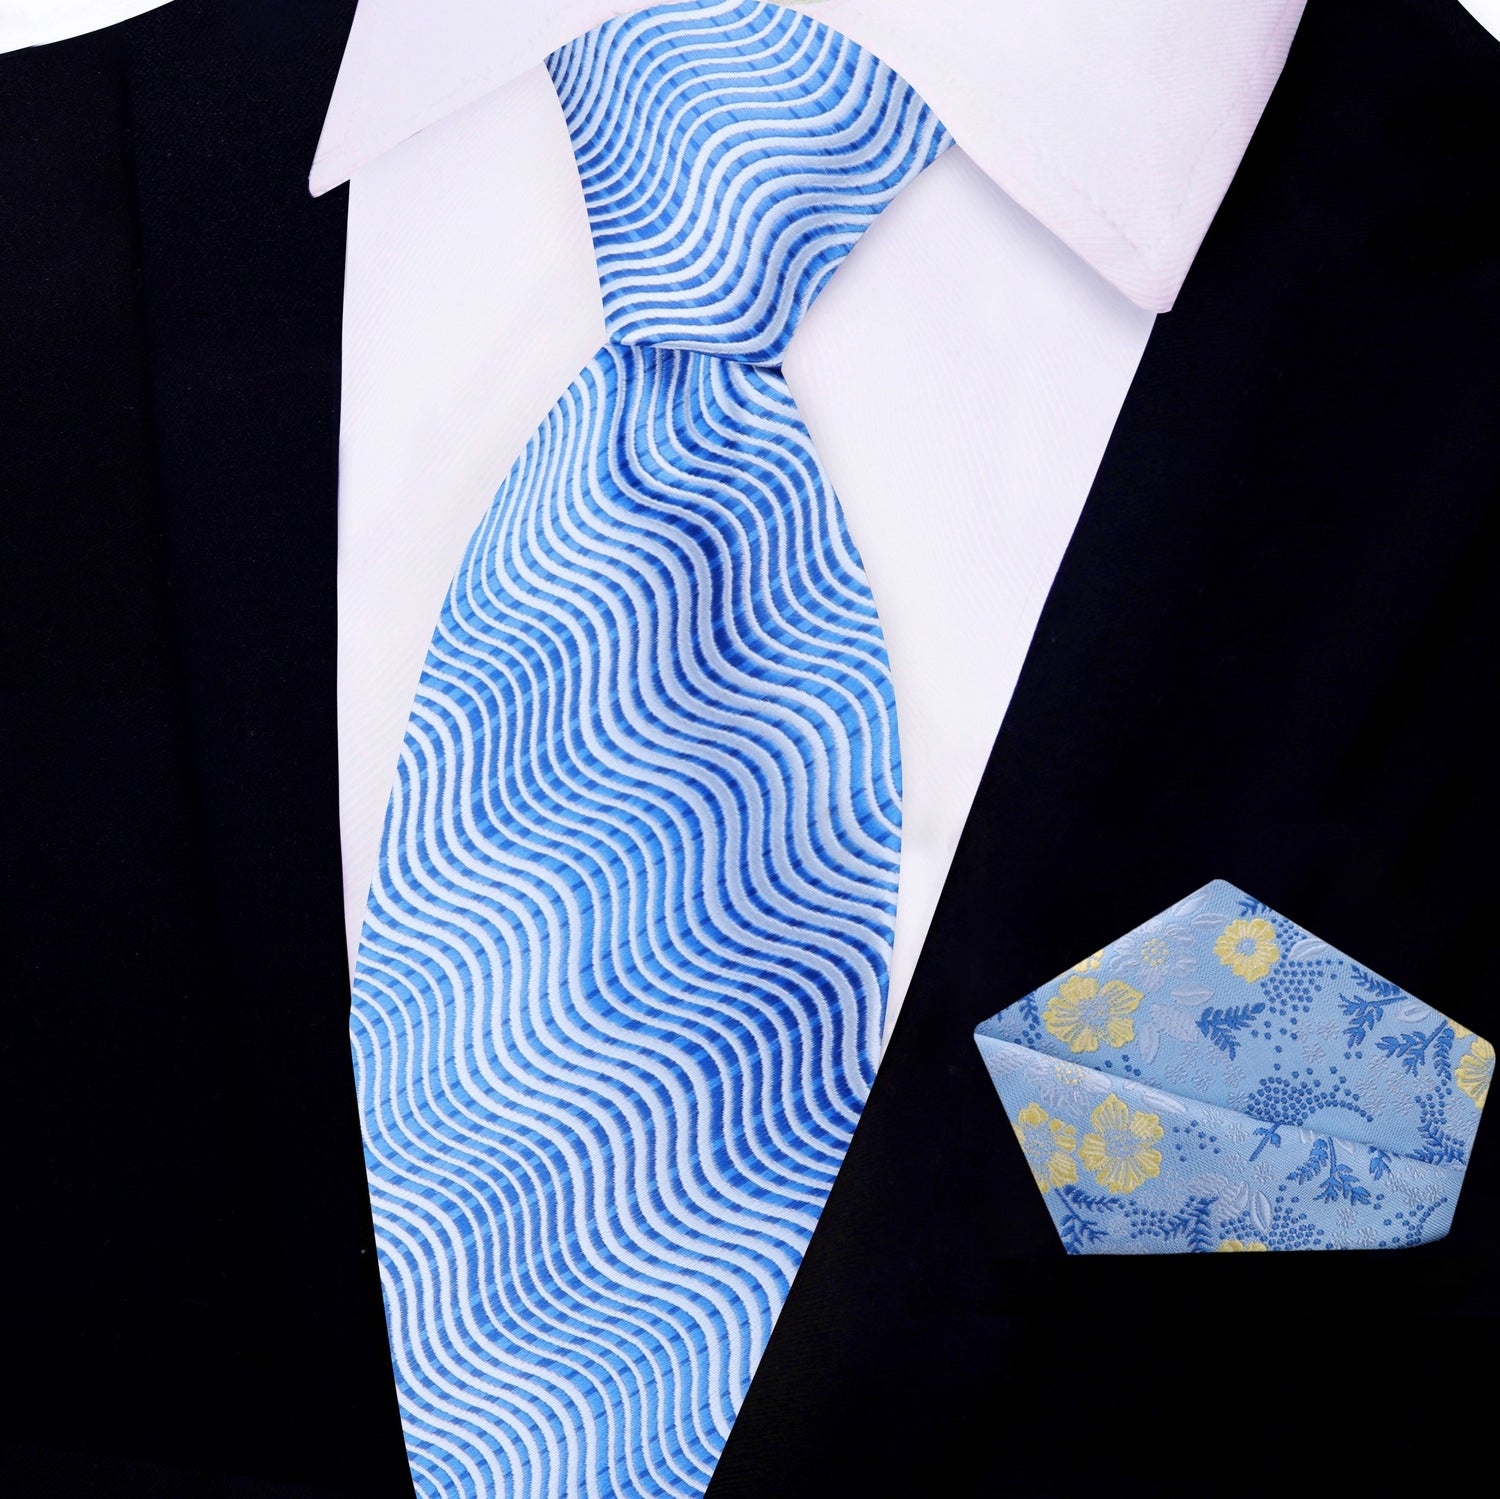 View 2: Shades of Blue Wavy Lines Necktie with Shades of Blue and Yellow Floral Pocket Square